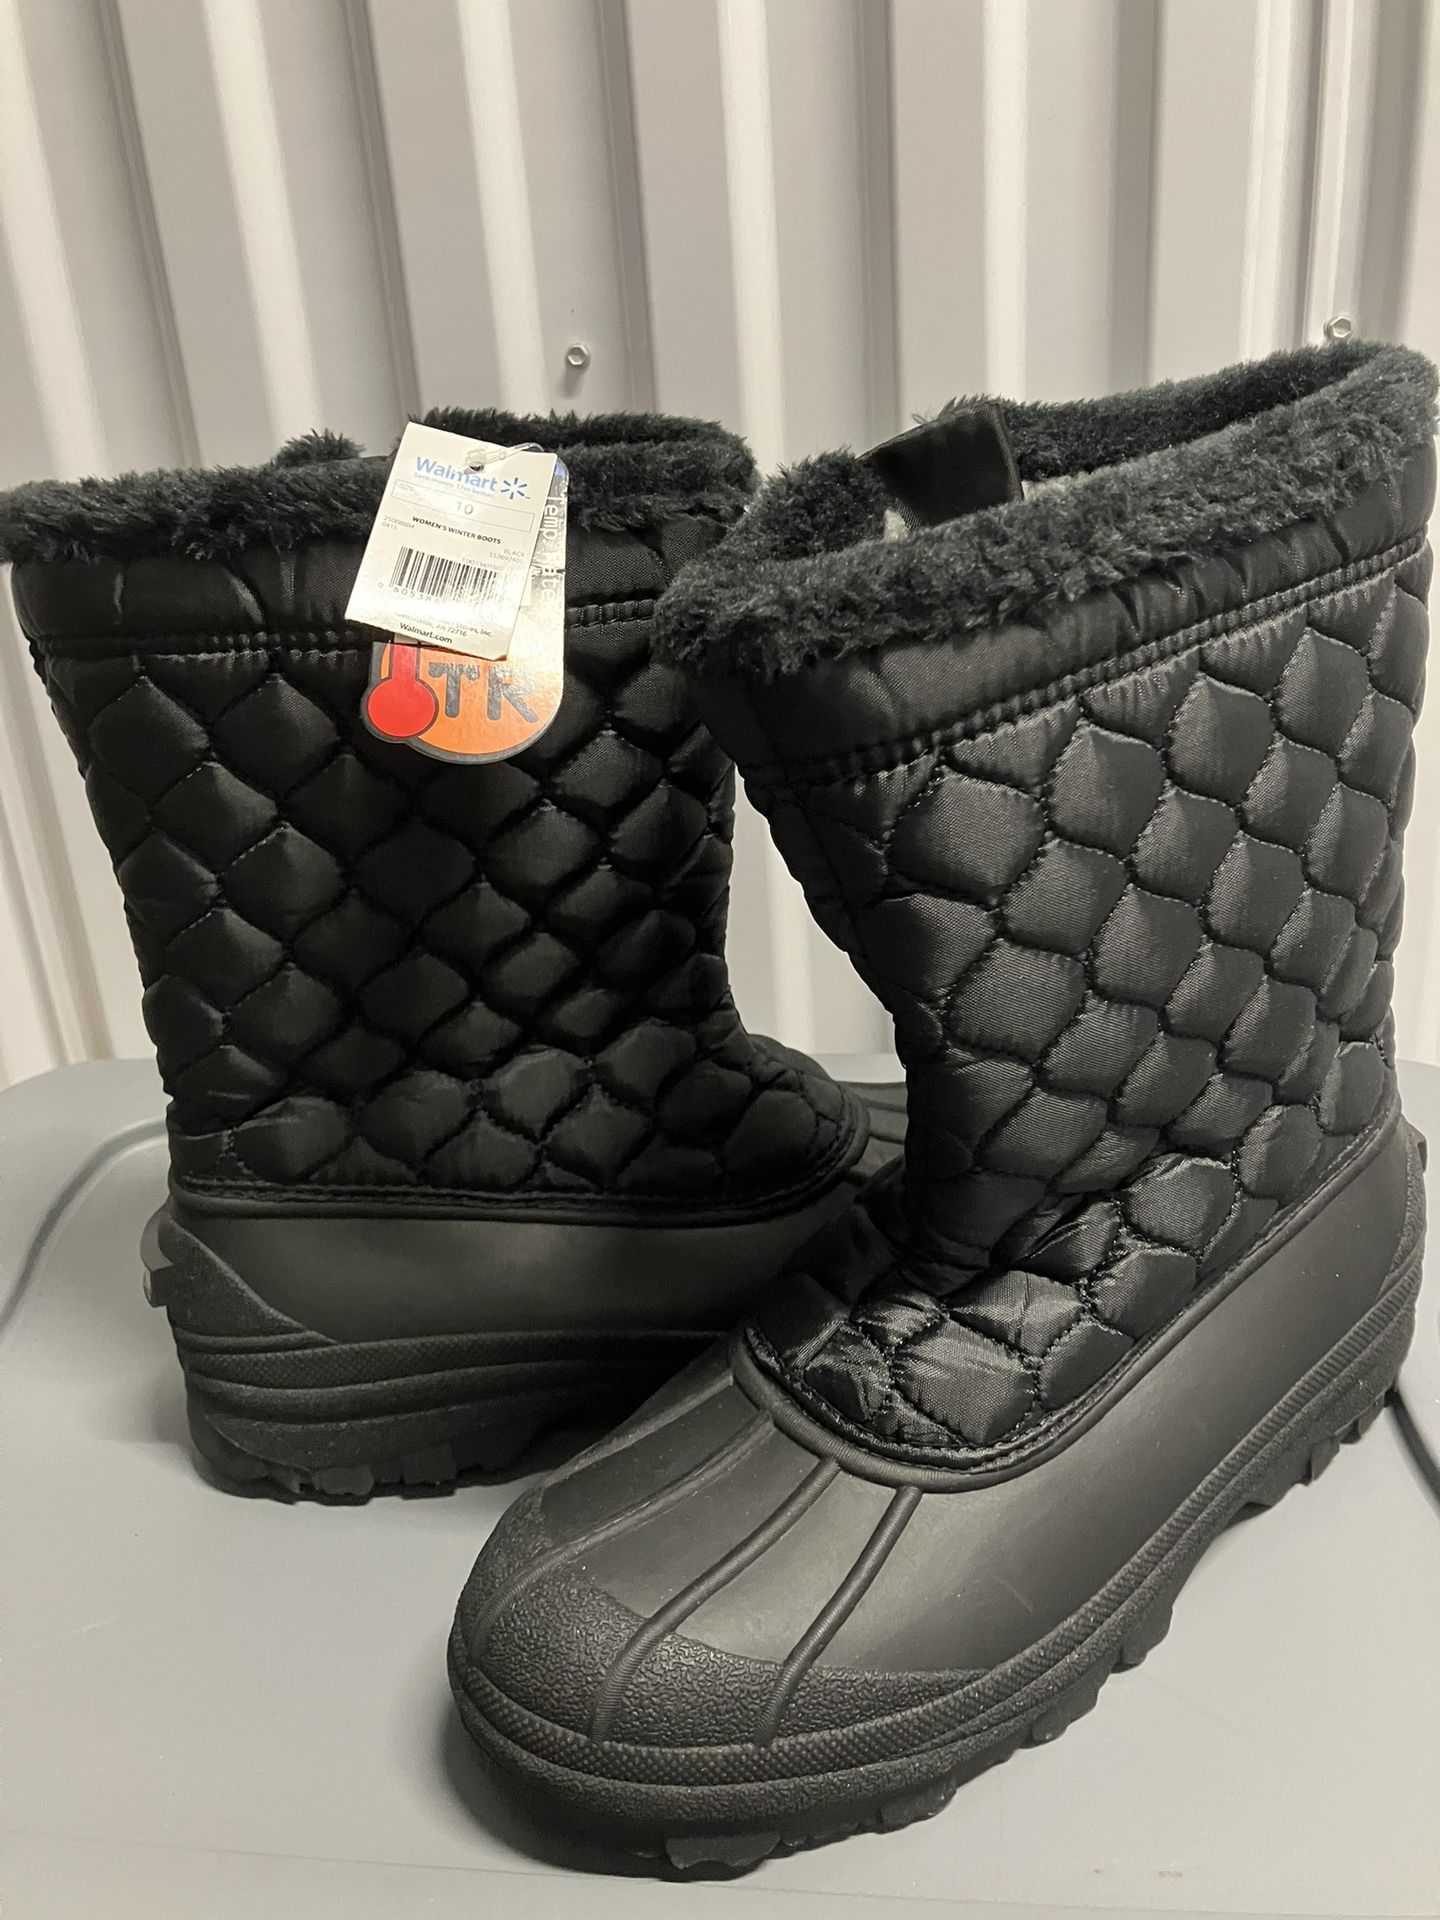 Women’s Boots, Size 10